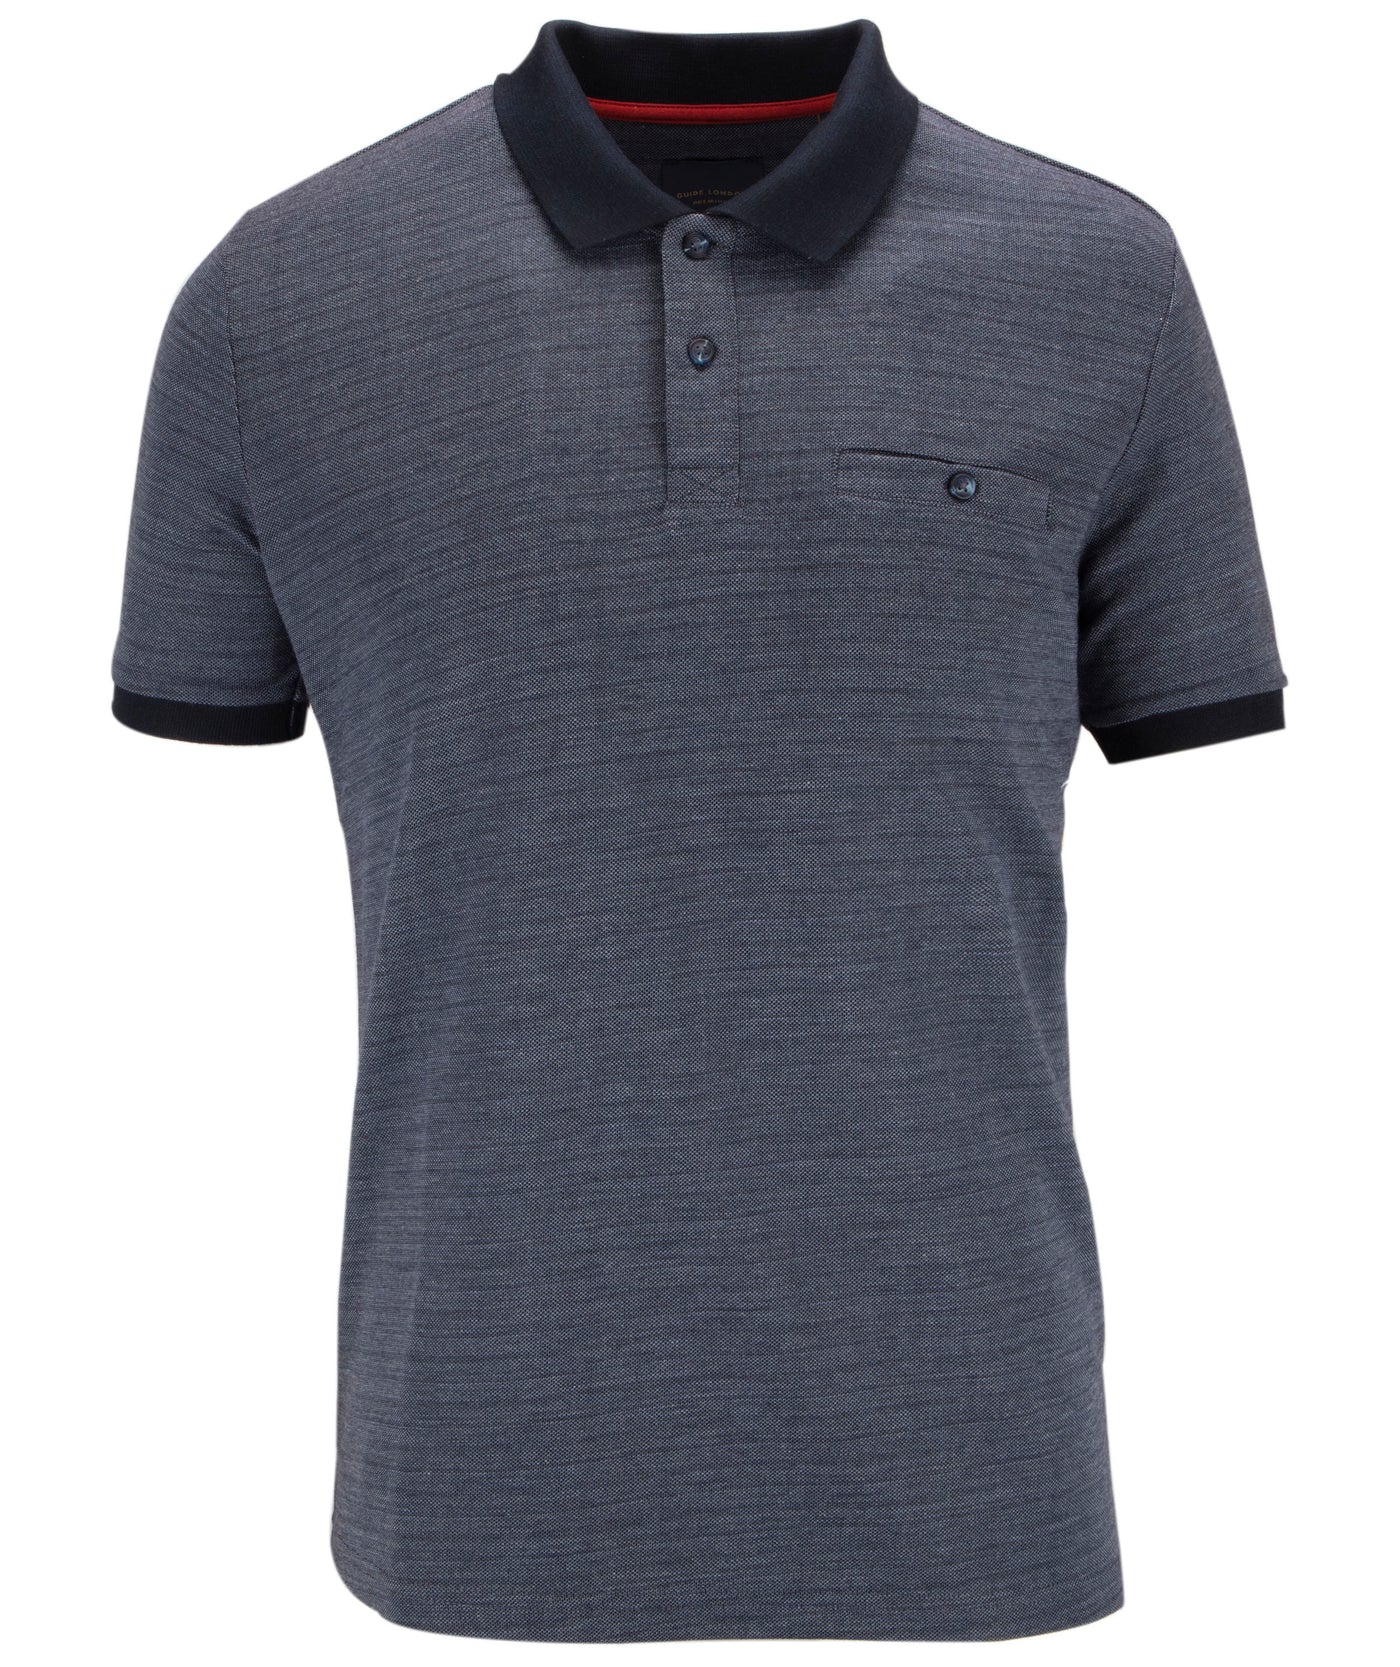 Navy Polo Shirt with Skull Detailing